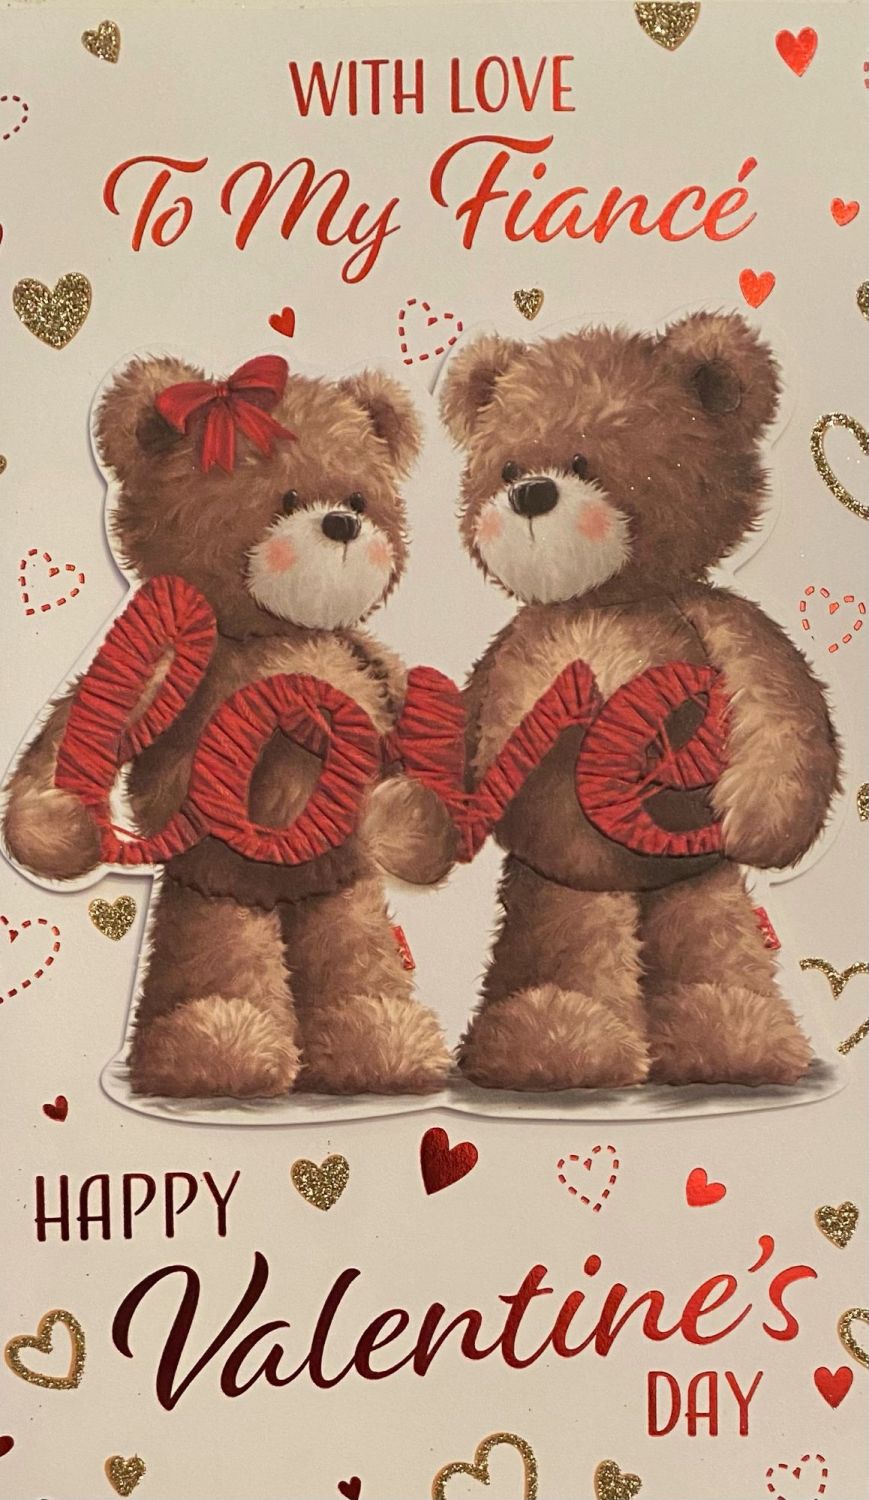 With Love To My Fiance Happy Valentine's Day - Card